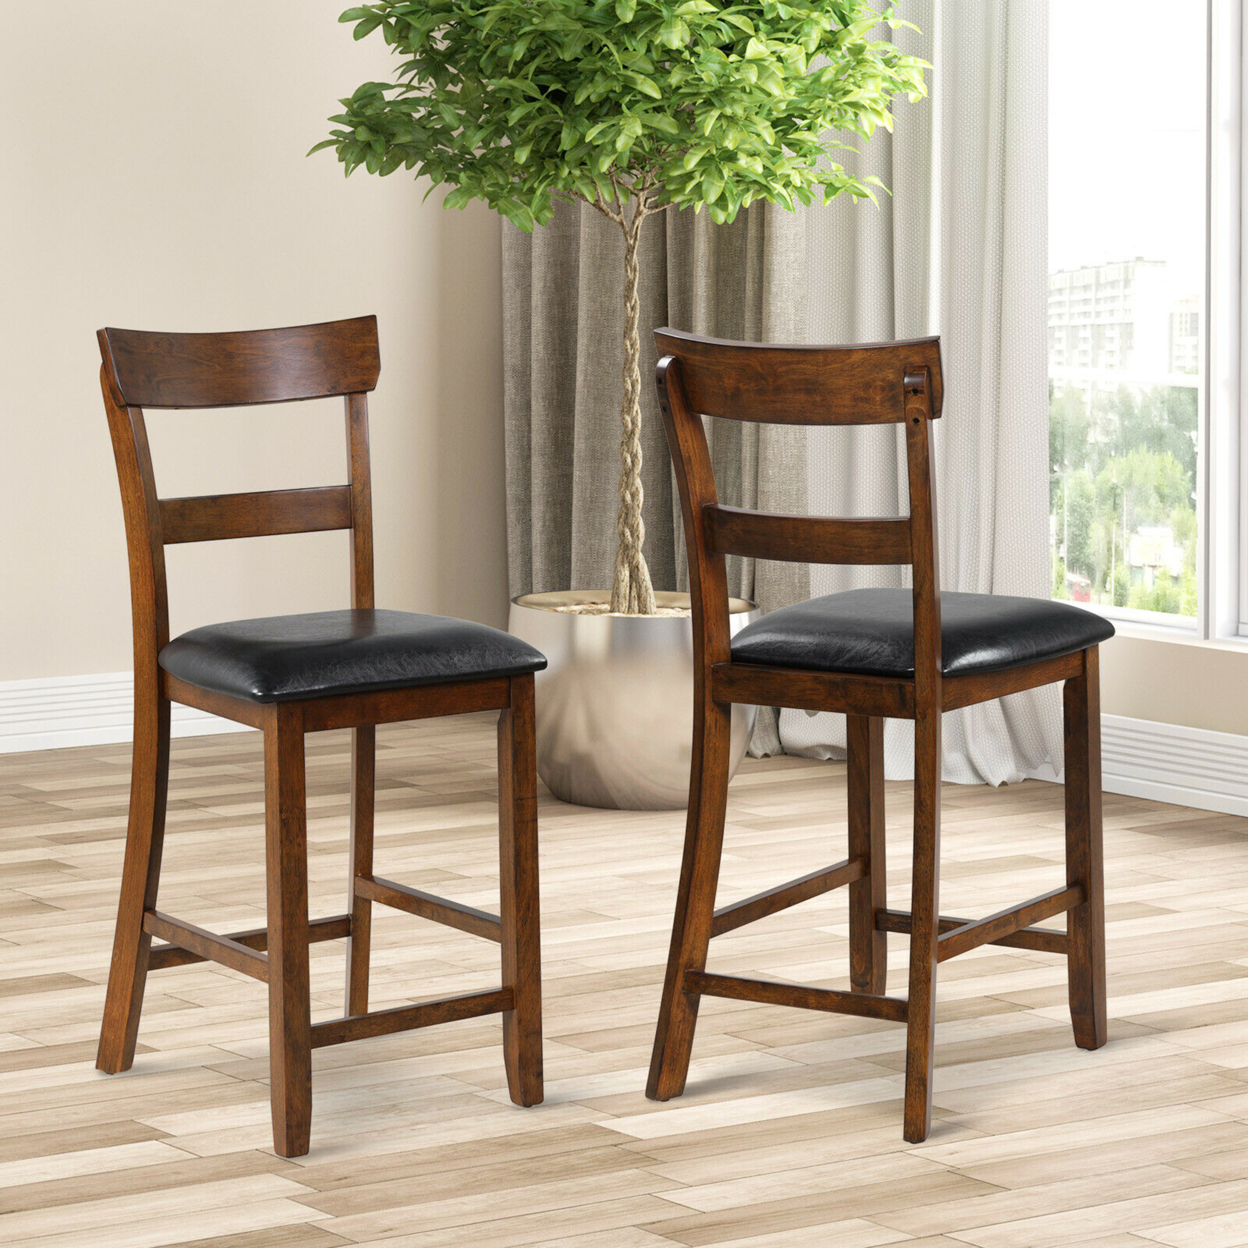 Set Of 2 Barstools Counter Height Chairs W/Leather Seat & Rubber Wood Legs